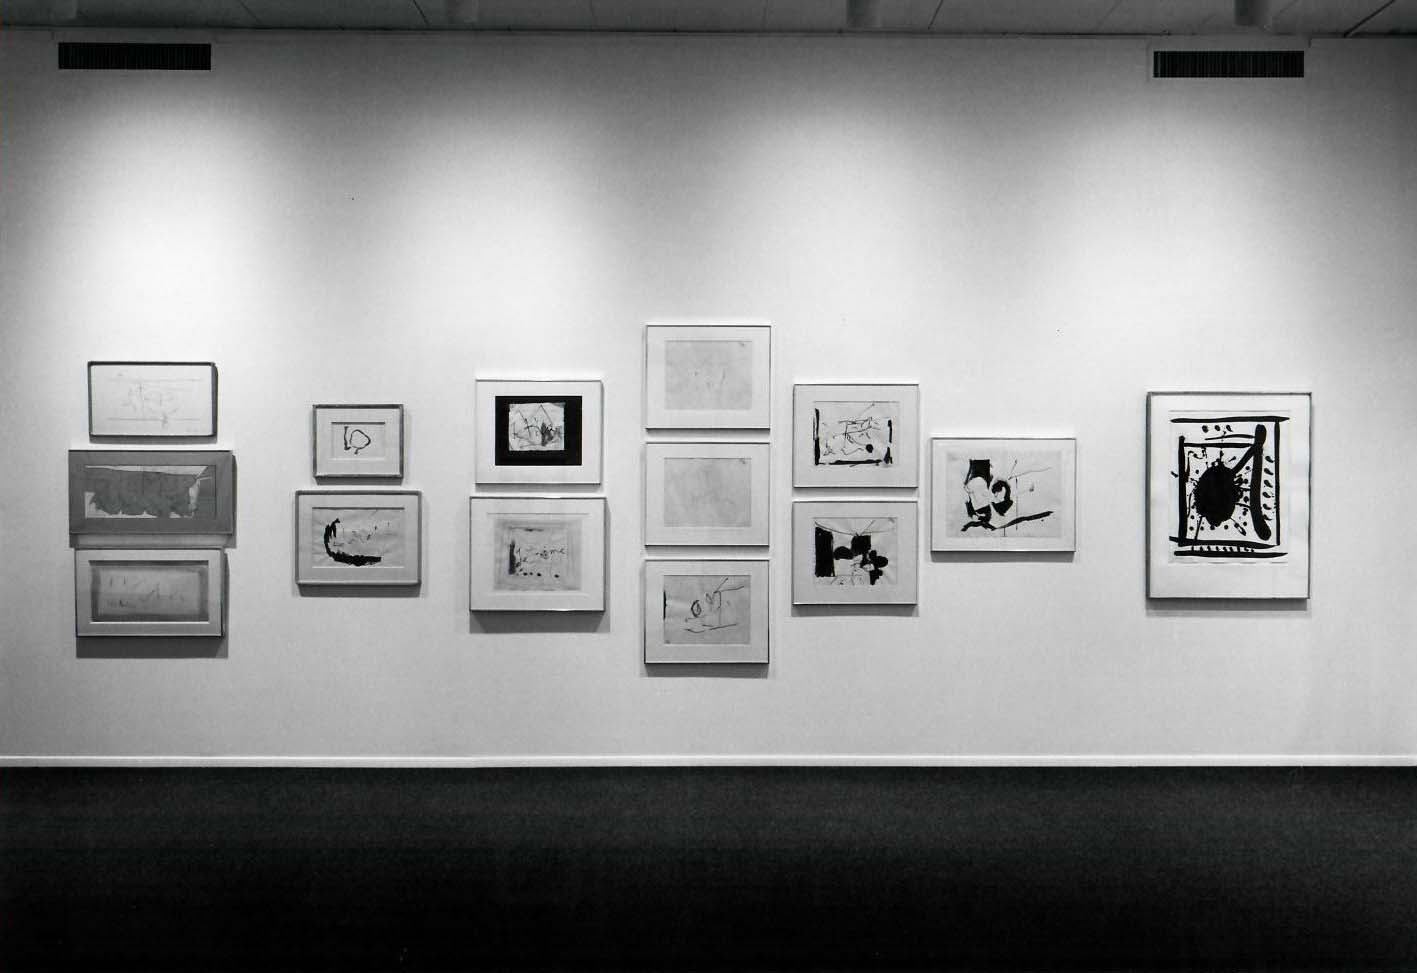 Installation view of Robert Motherwell Drawings: A Retrospective, 1941 to the Present at the Janie C. Lee Gallery, Houston, December 1979